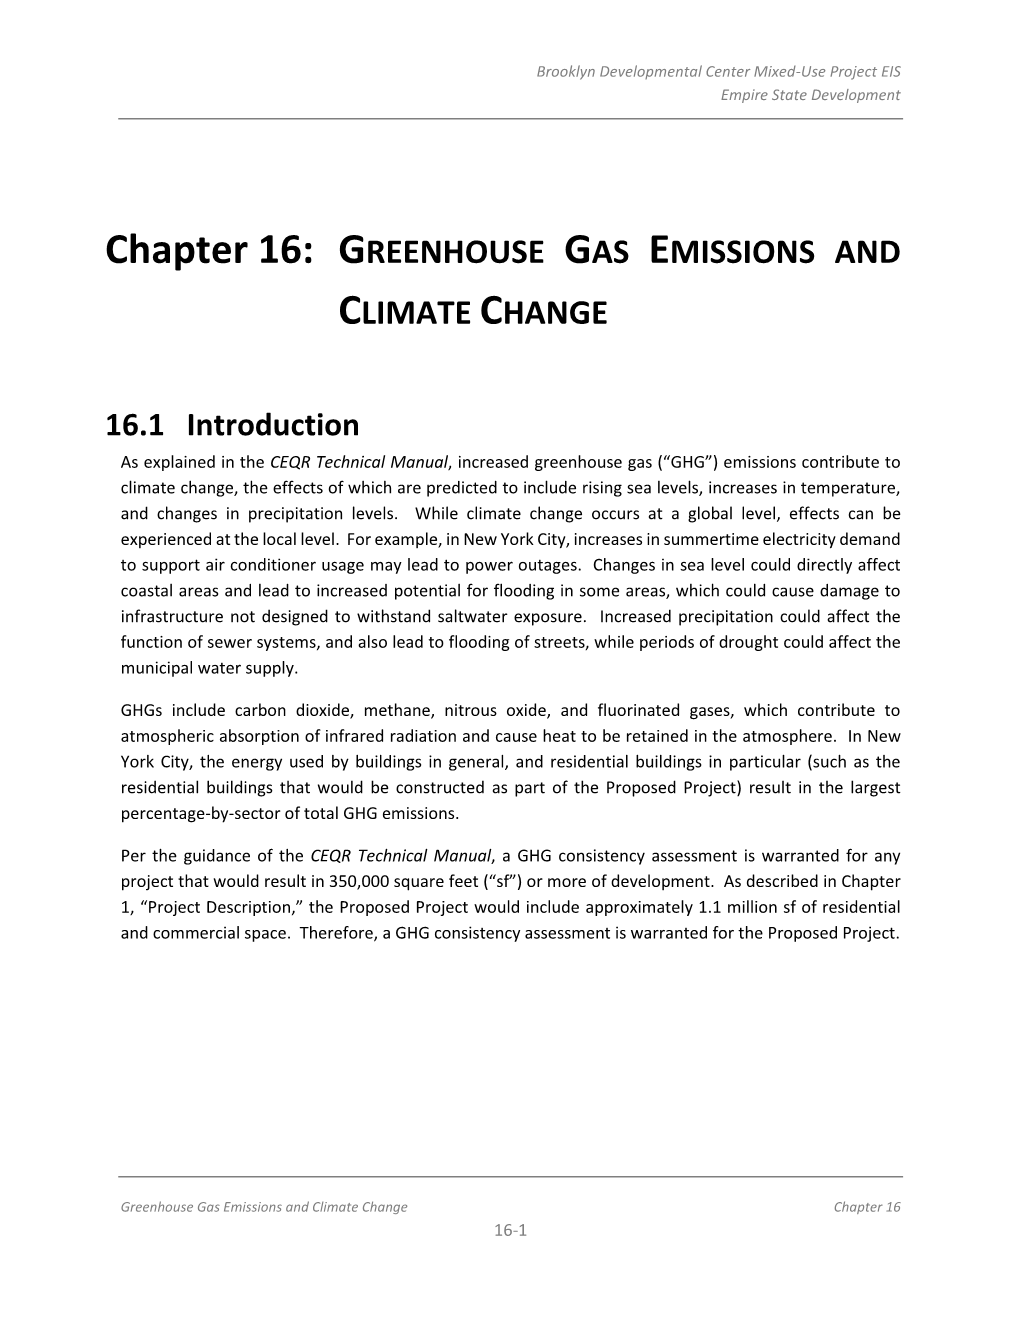 Greenhouse Gas Emissions and Climate Change